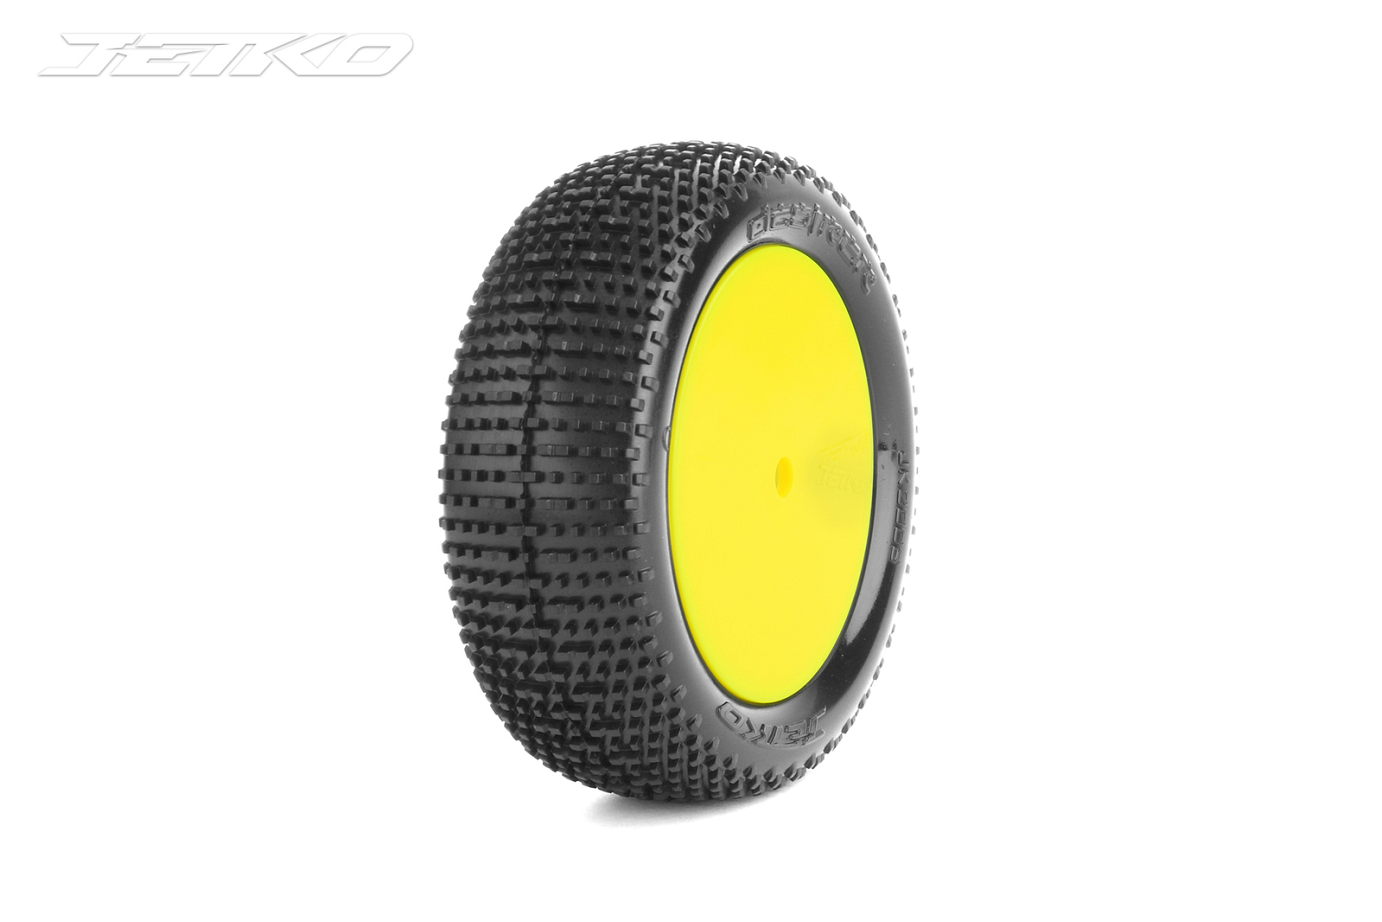 Jetko 1/10 Buggy 2WD Front-DESIRER/Dish/Yellow Rim/Super Soft [2008DYSSG]